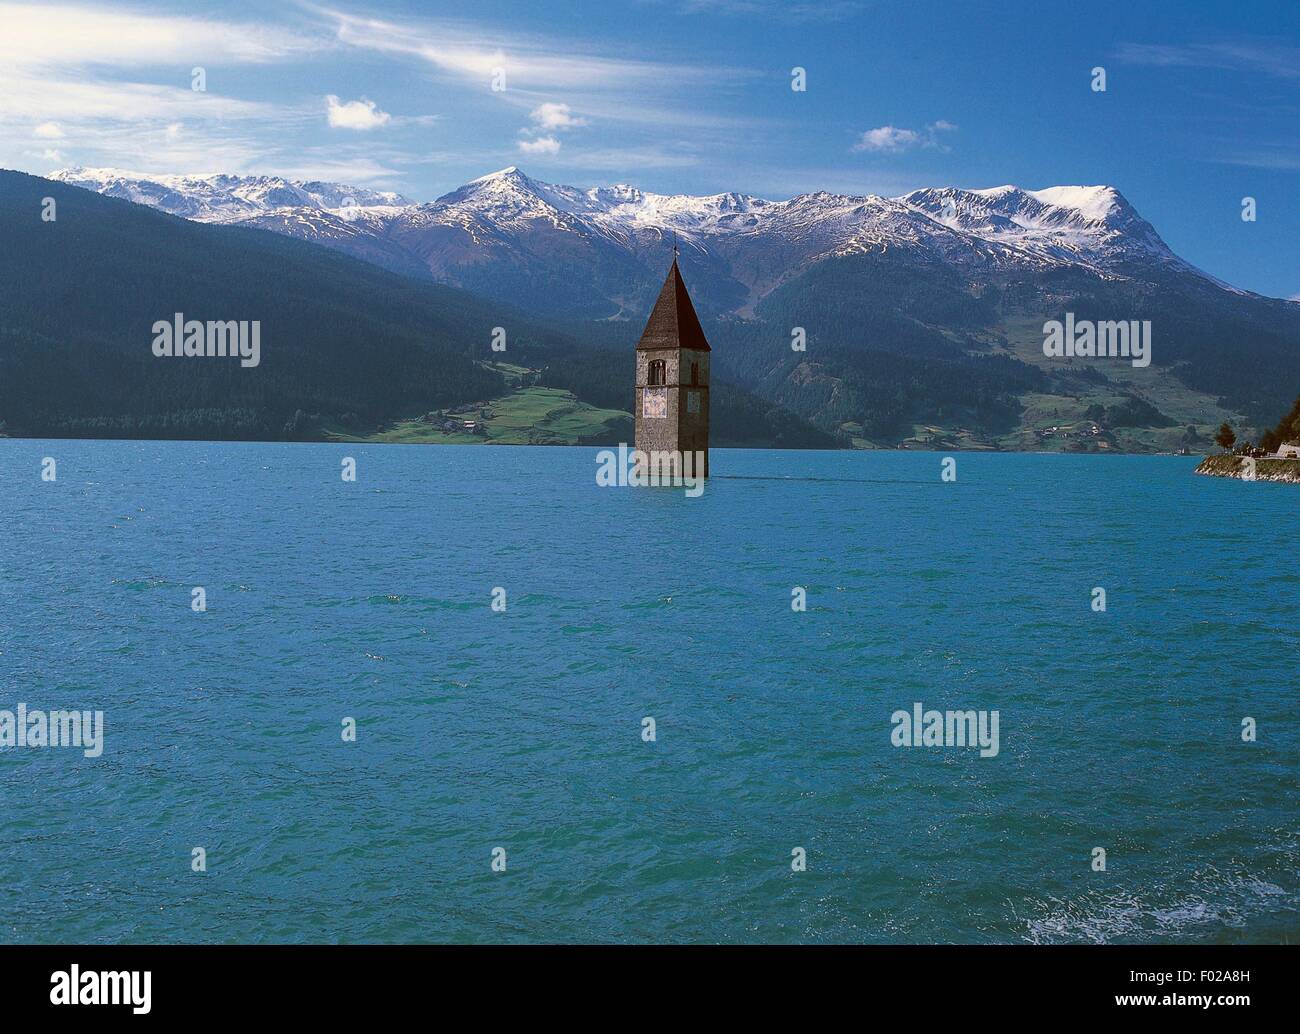 The old bell tower (14th century) of Curon Venosta church rising out of the waters of the artificial lake of Resia, Trentino-Alto Adige, Italy. Stock Photo